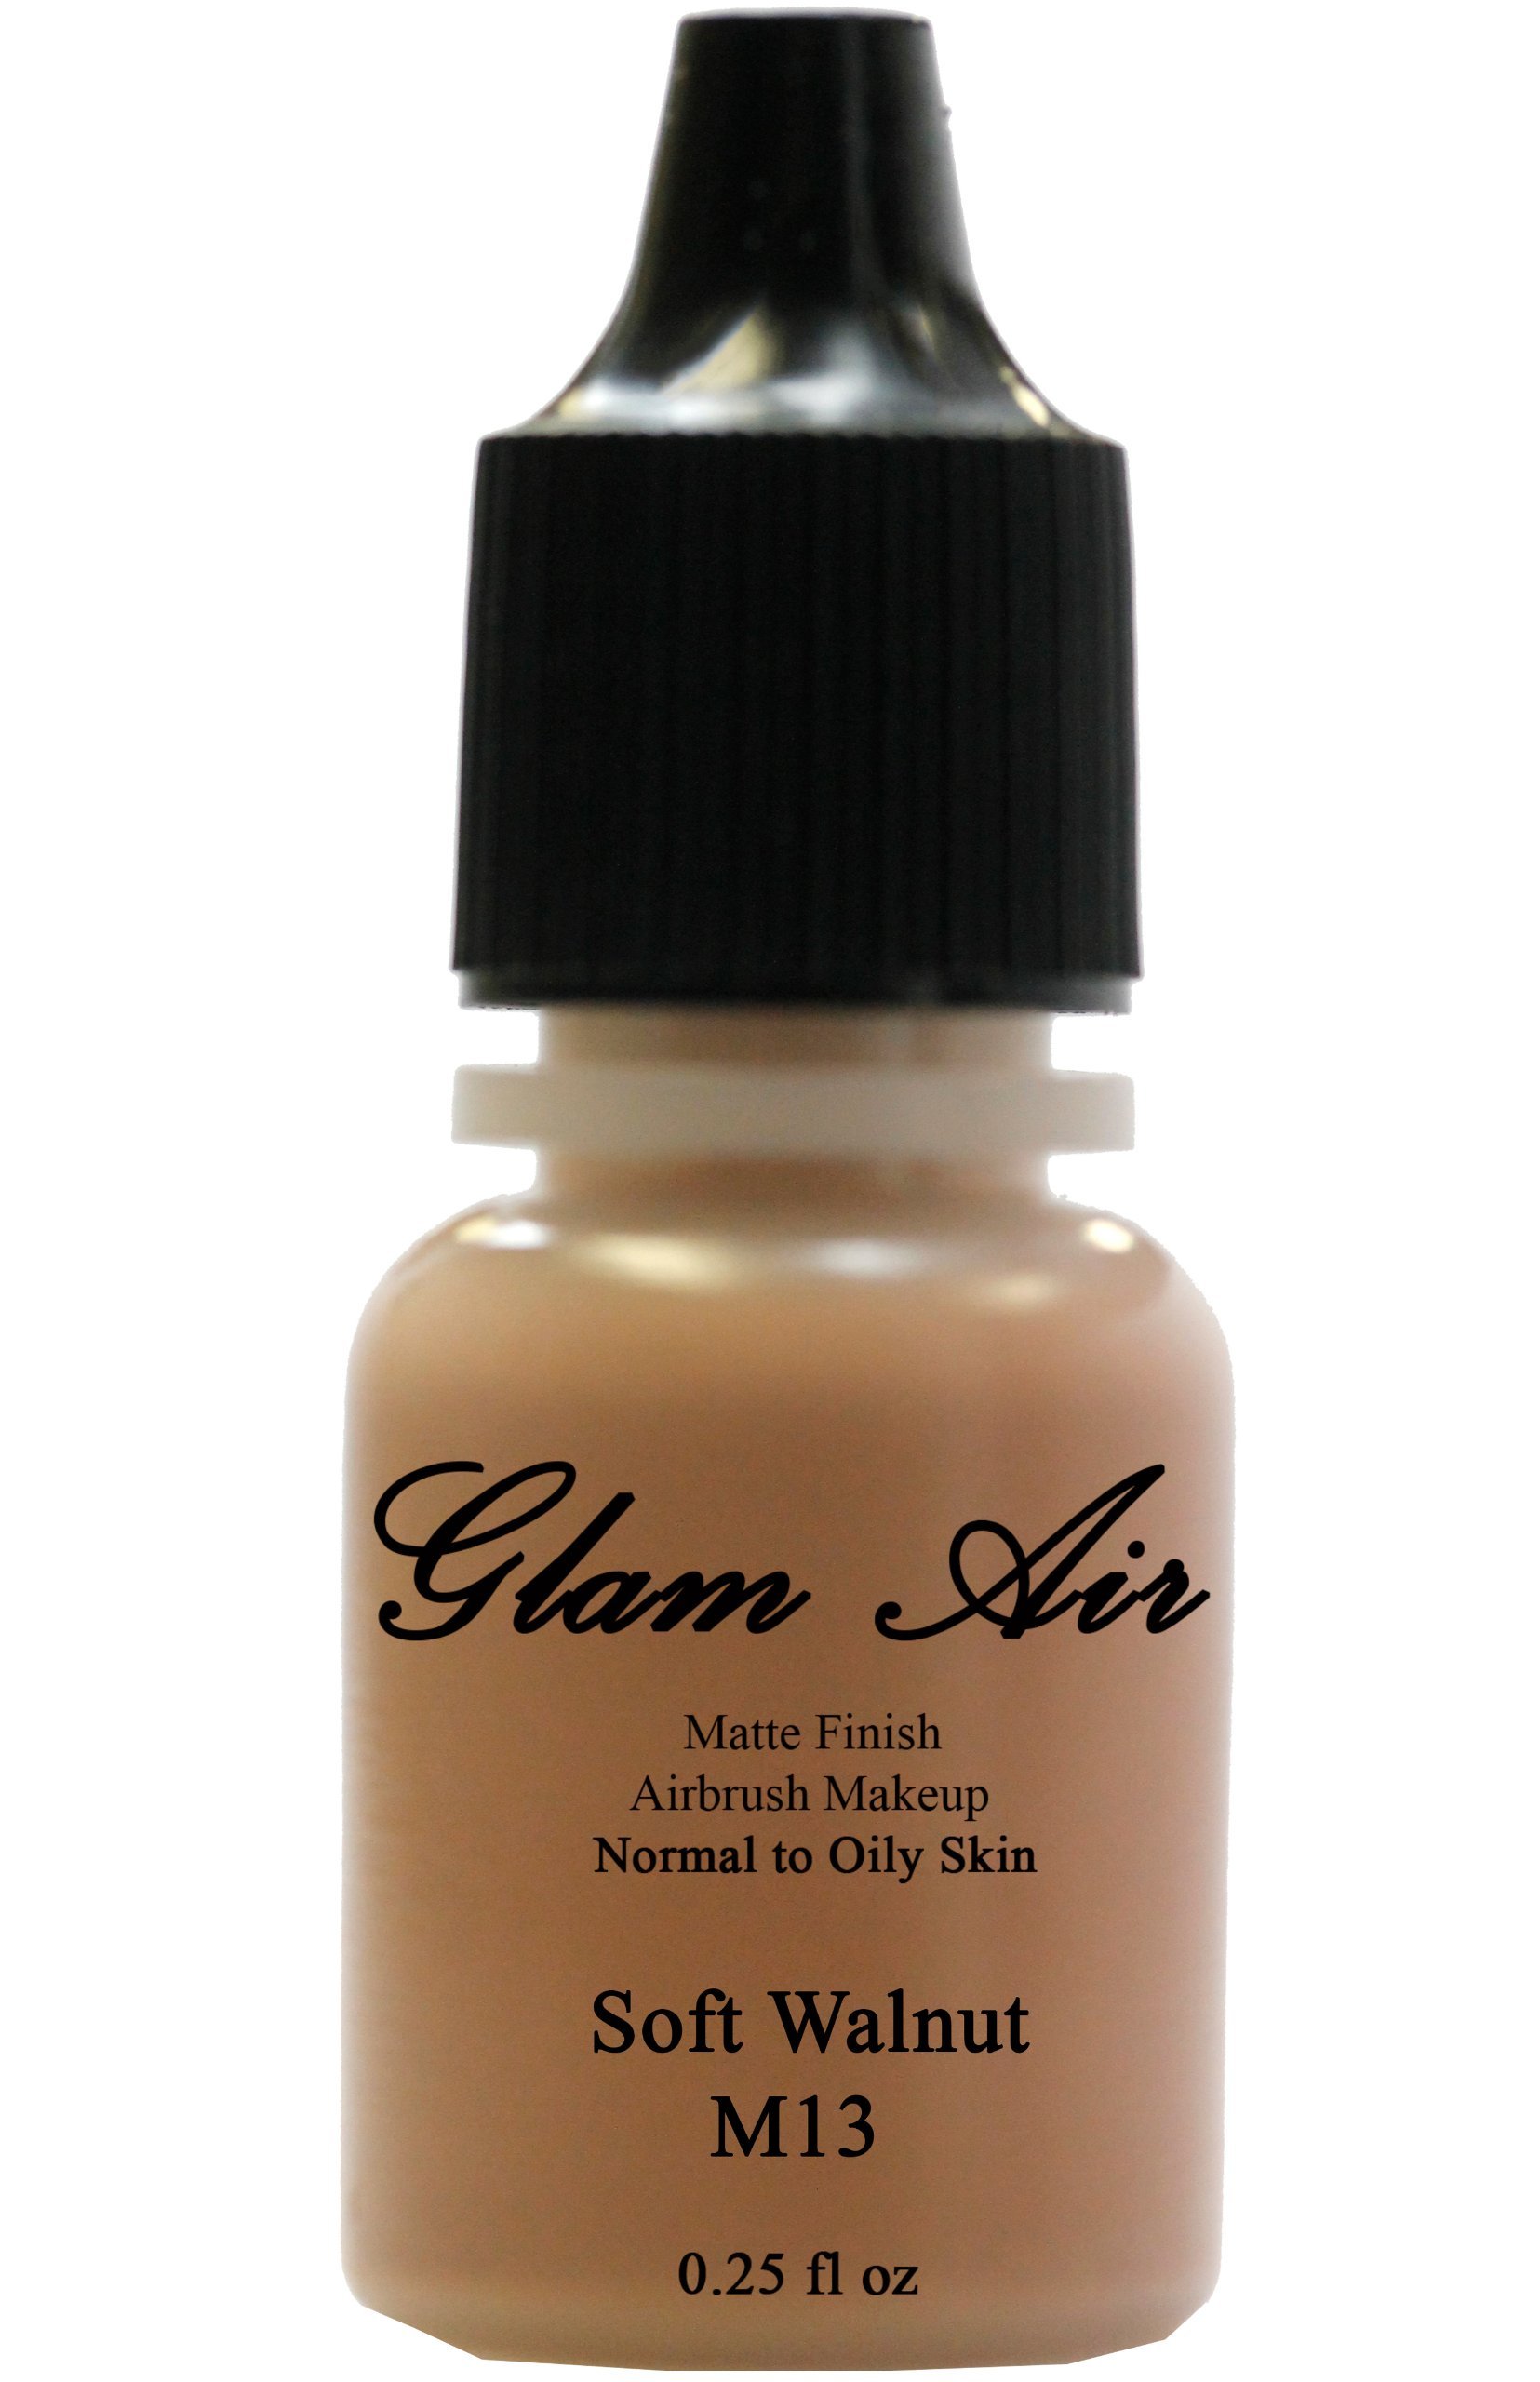 Glam Air Airbrush Makeup Foundation Water Based Matte M13 Soft Walnut (Ideal for Normal to Oily Skin) 0.25oz